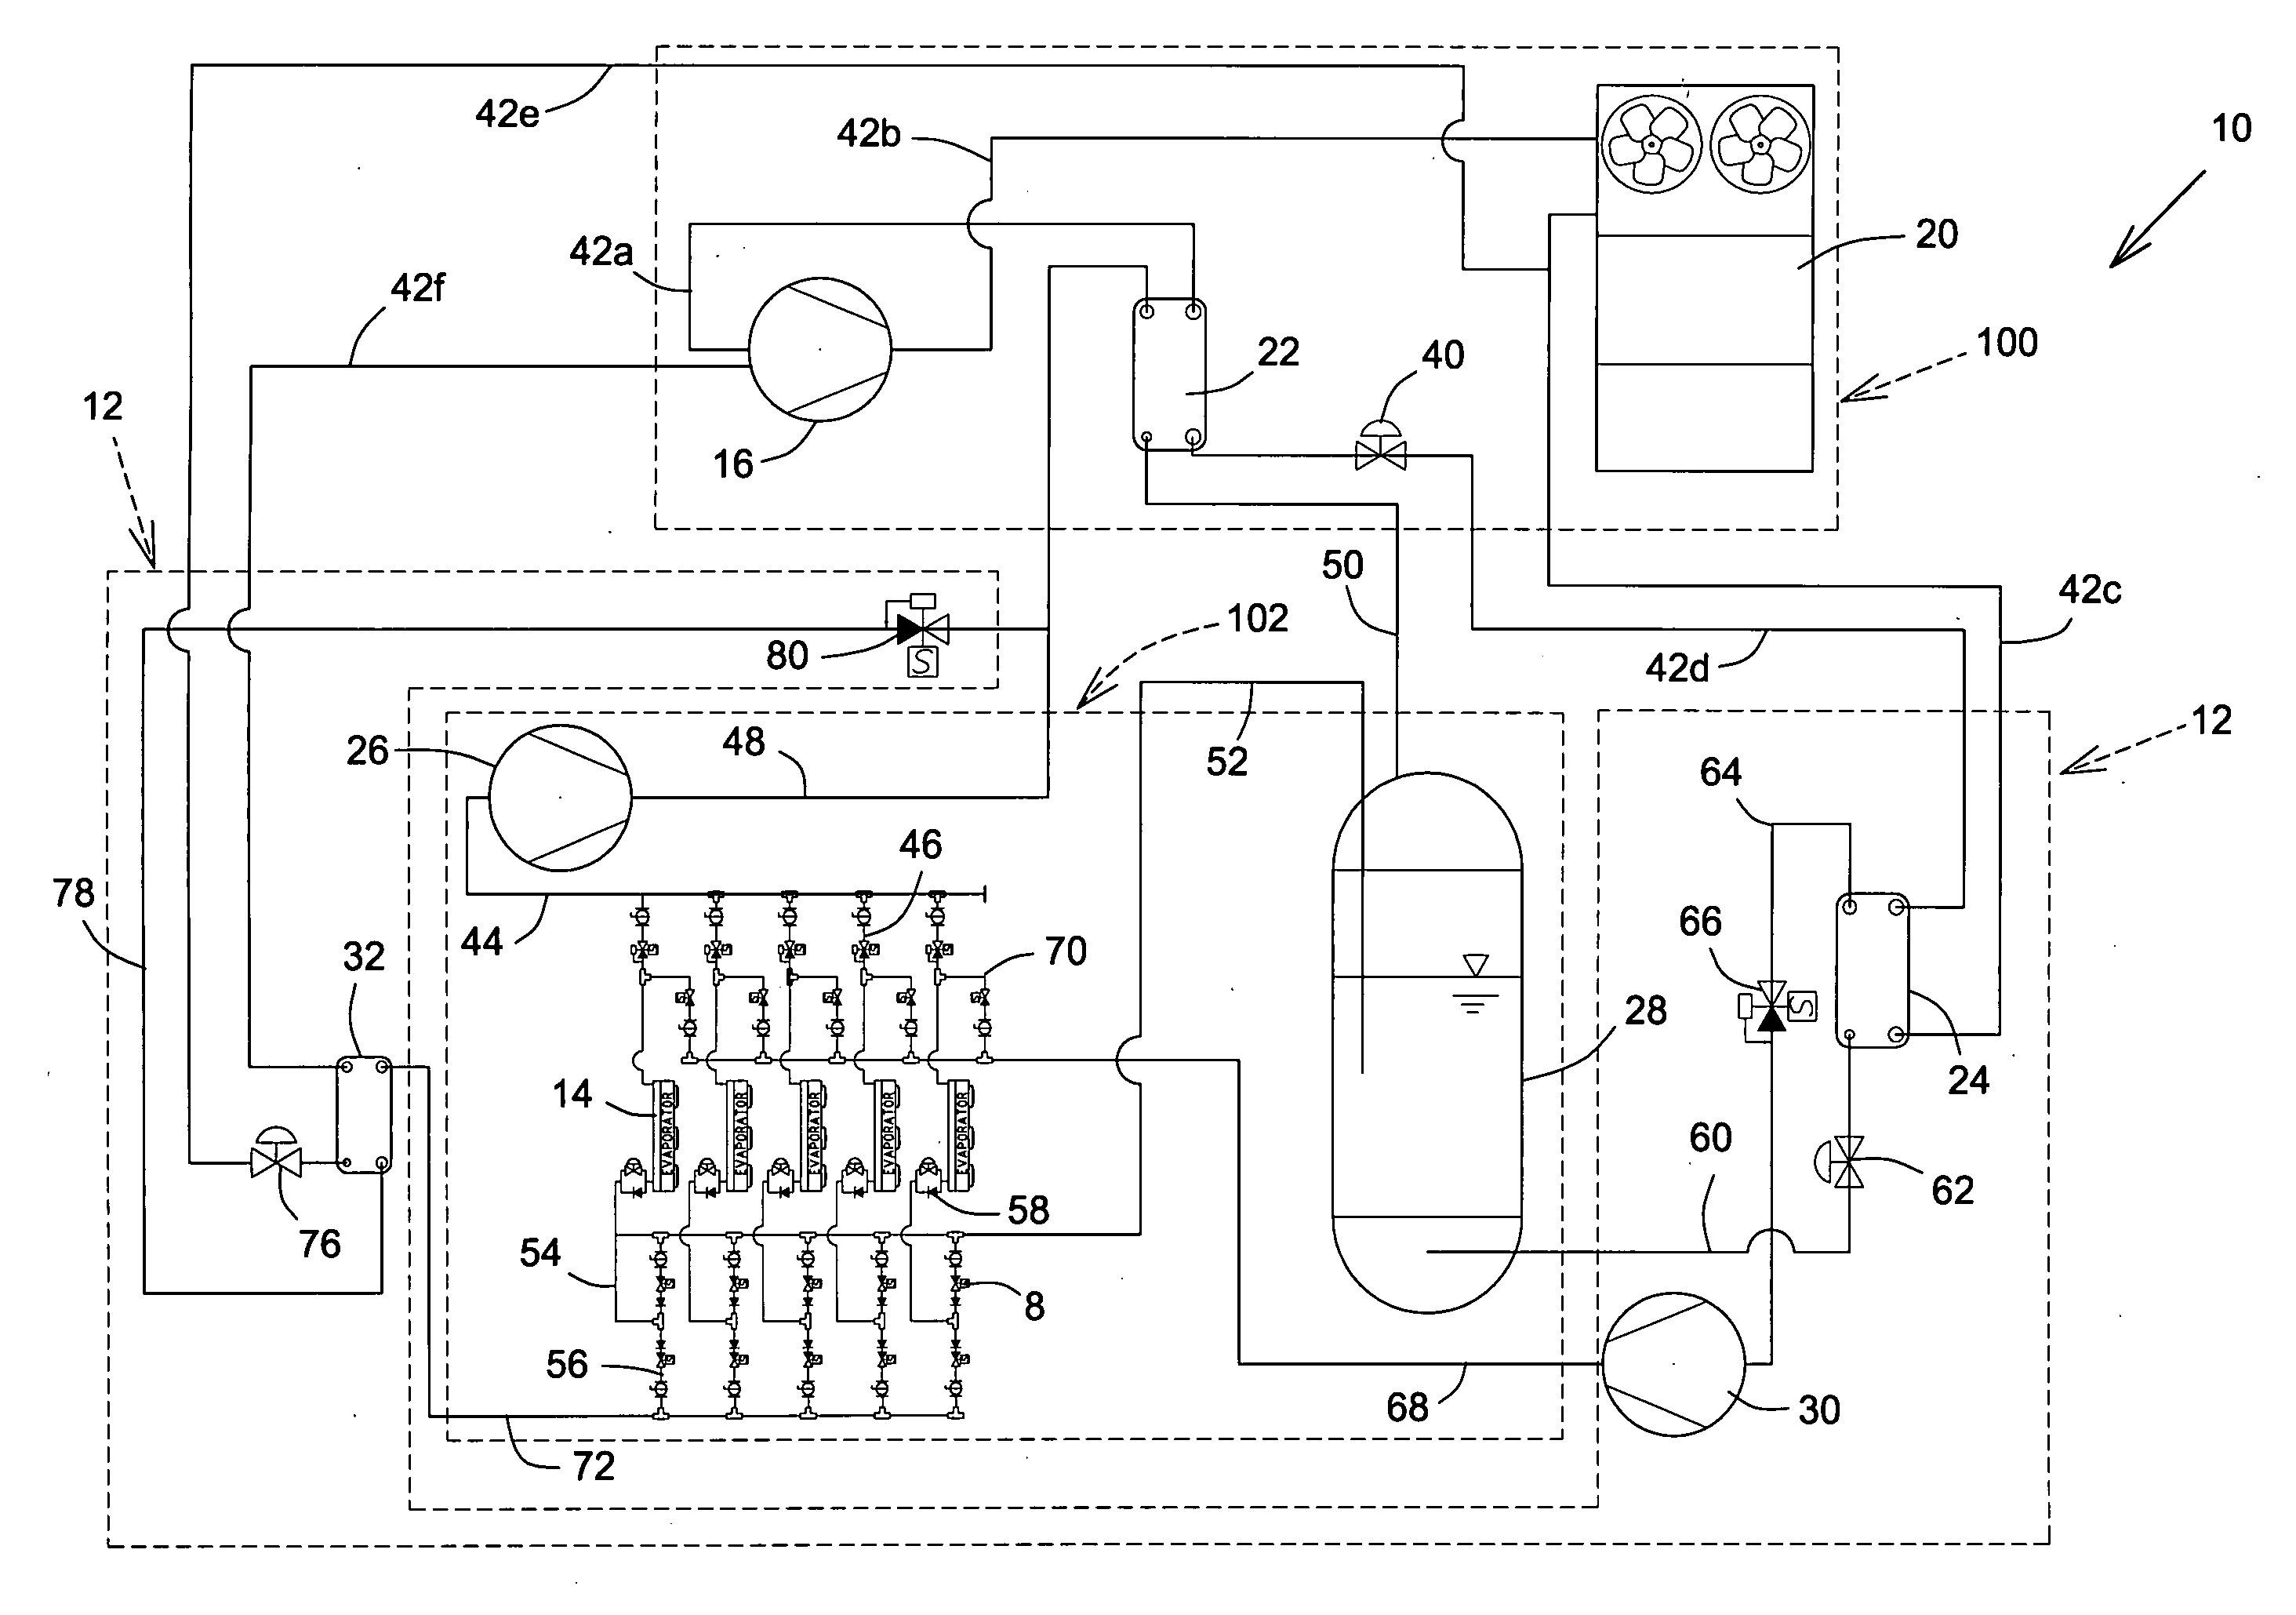 Defrost system and method for a subcritical cascade R-744 refrigeration system